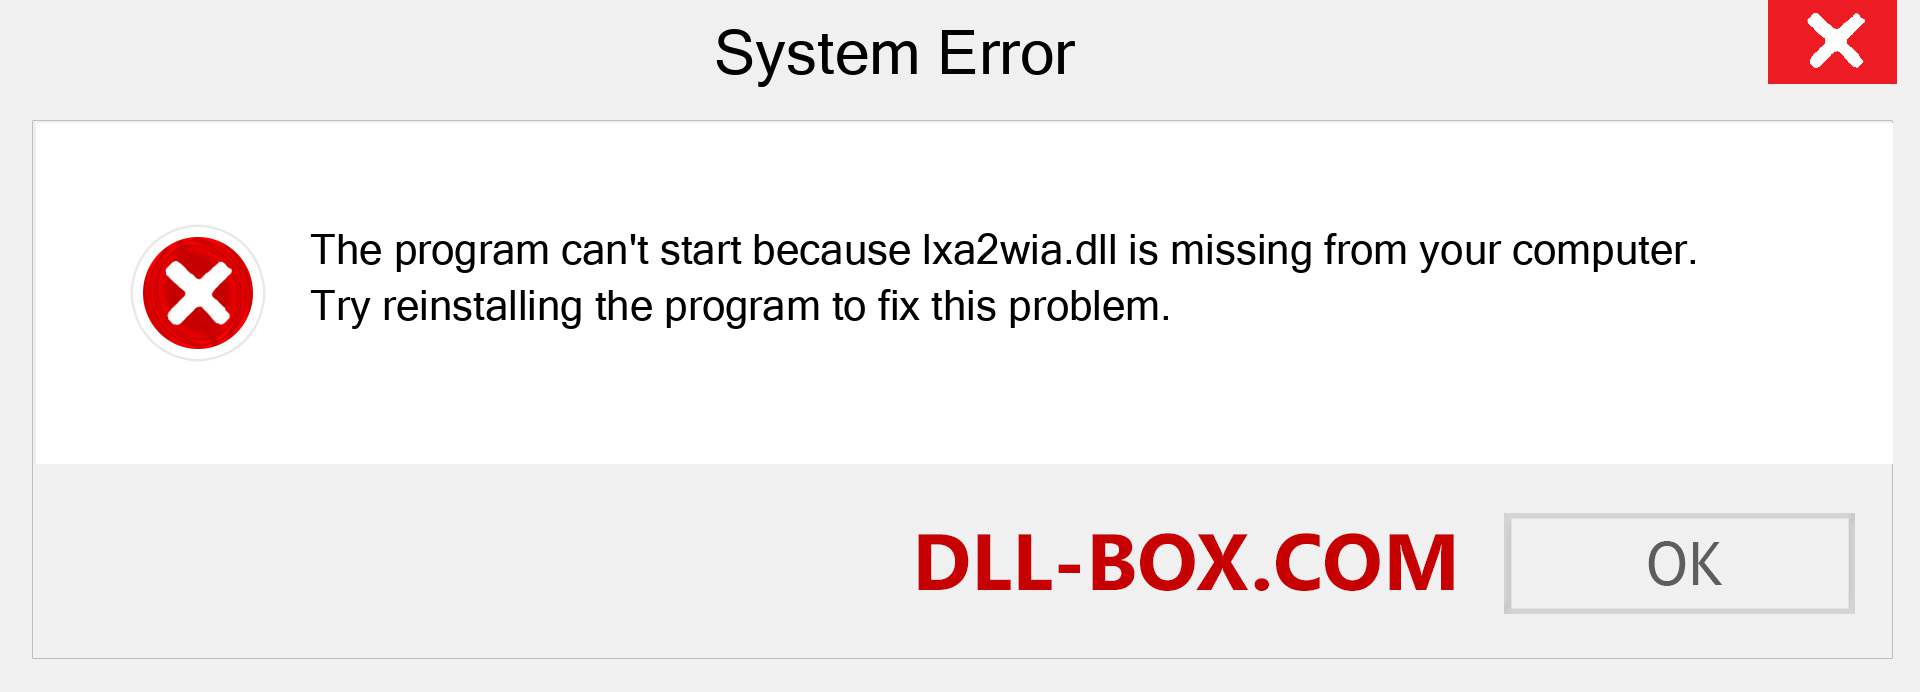  lxa2wia.dll file is missing?. Download for Windows 7, 8, 10 - Fix  lxa2wia dll Missing Error on Windows, photos, images